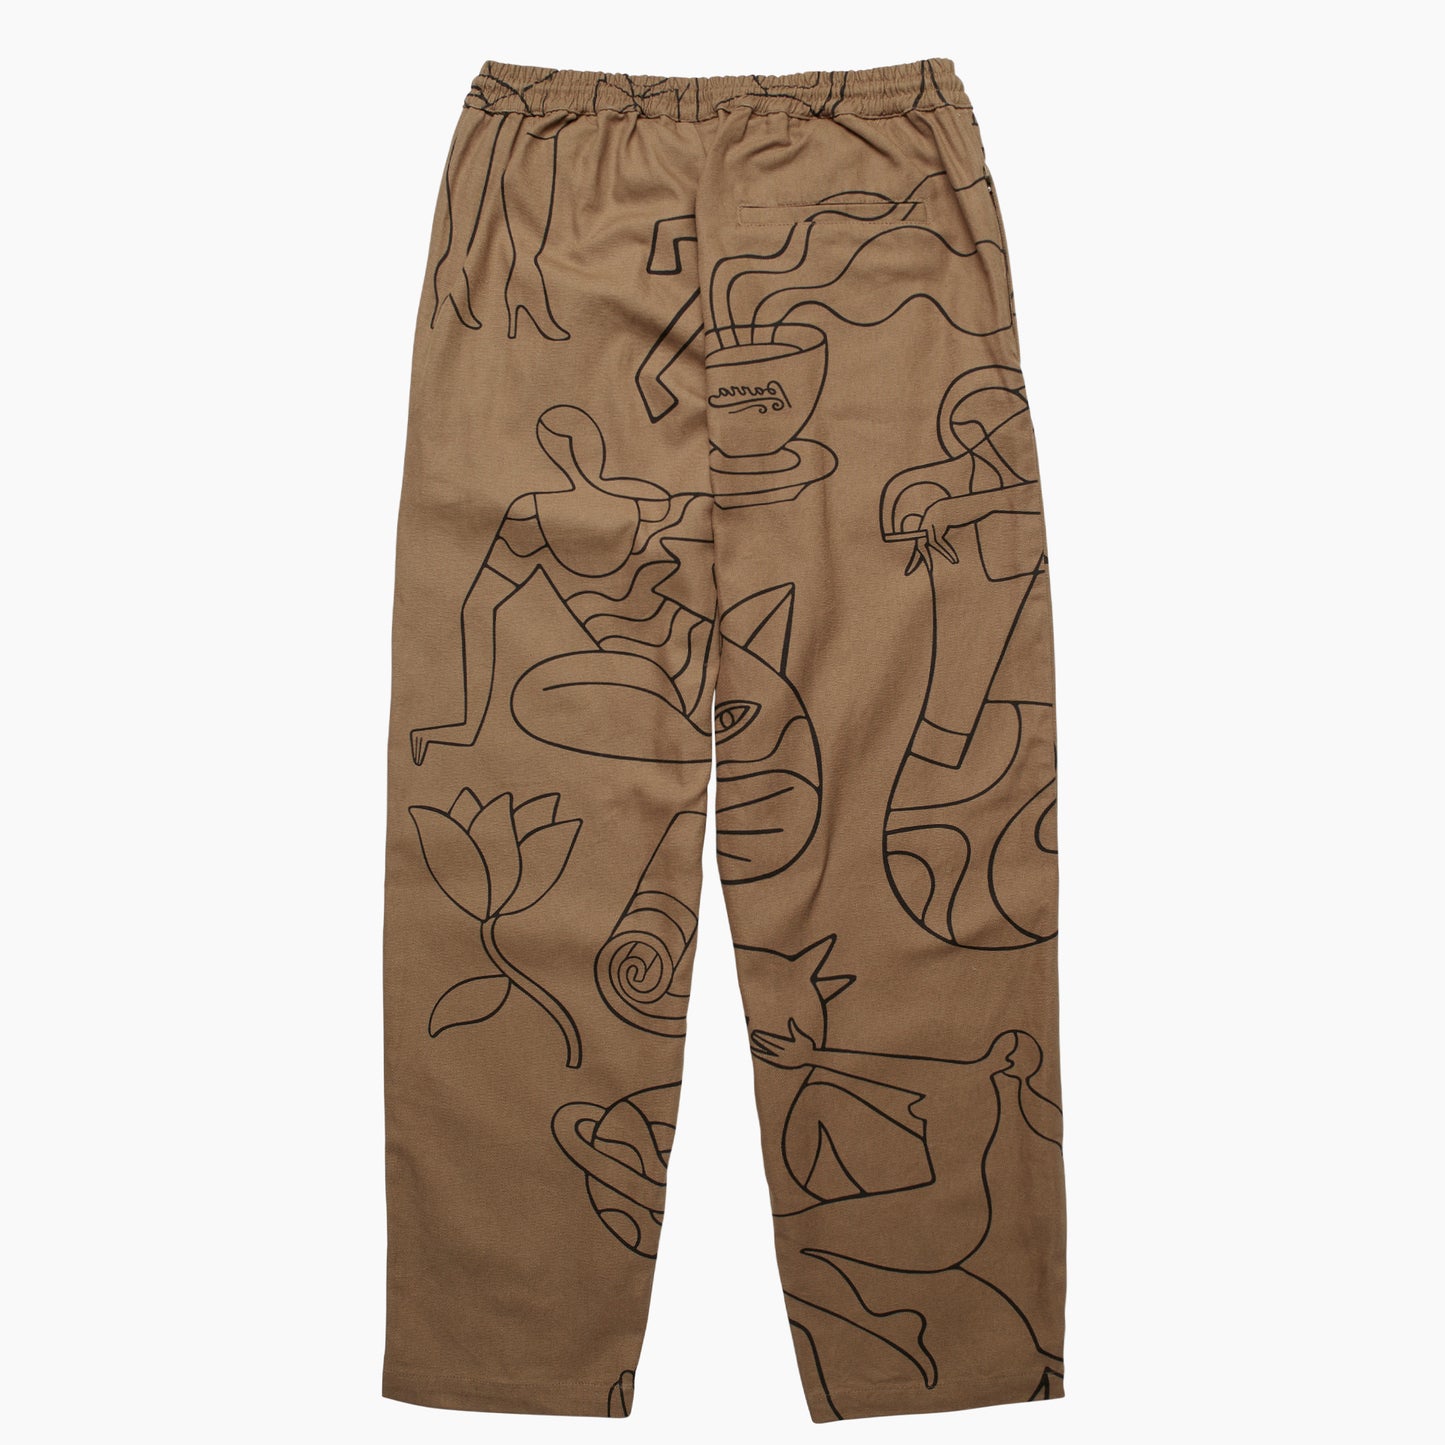 By Parra Experience Life Worker Pant